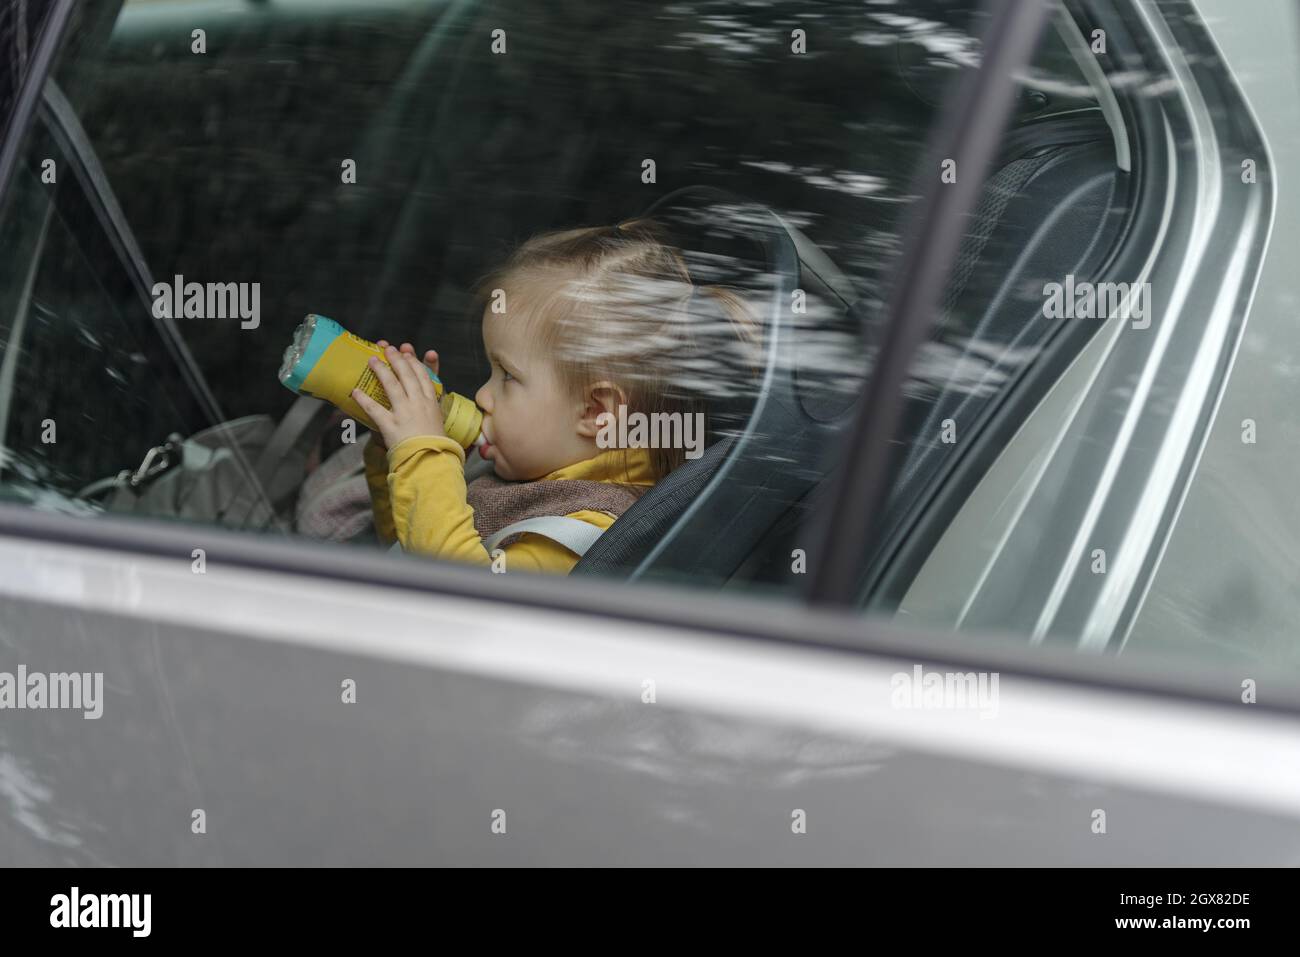 Little girl sitting in back seat of car drinking water Stock Photo